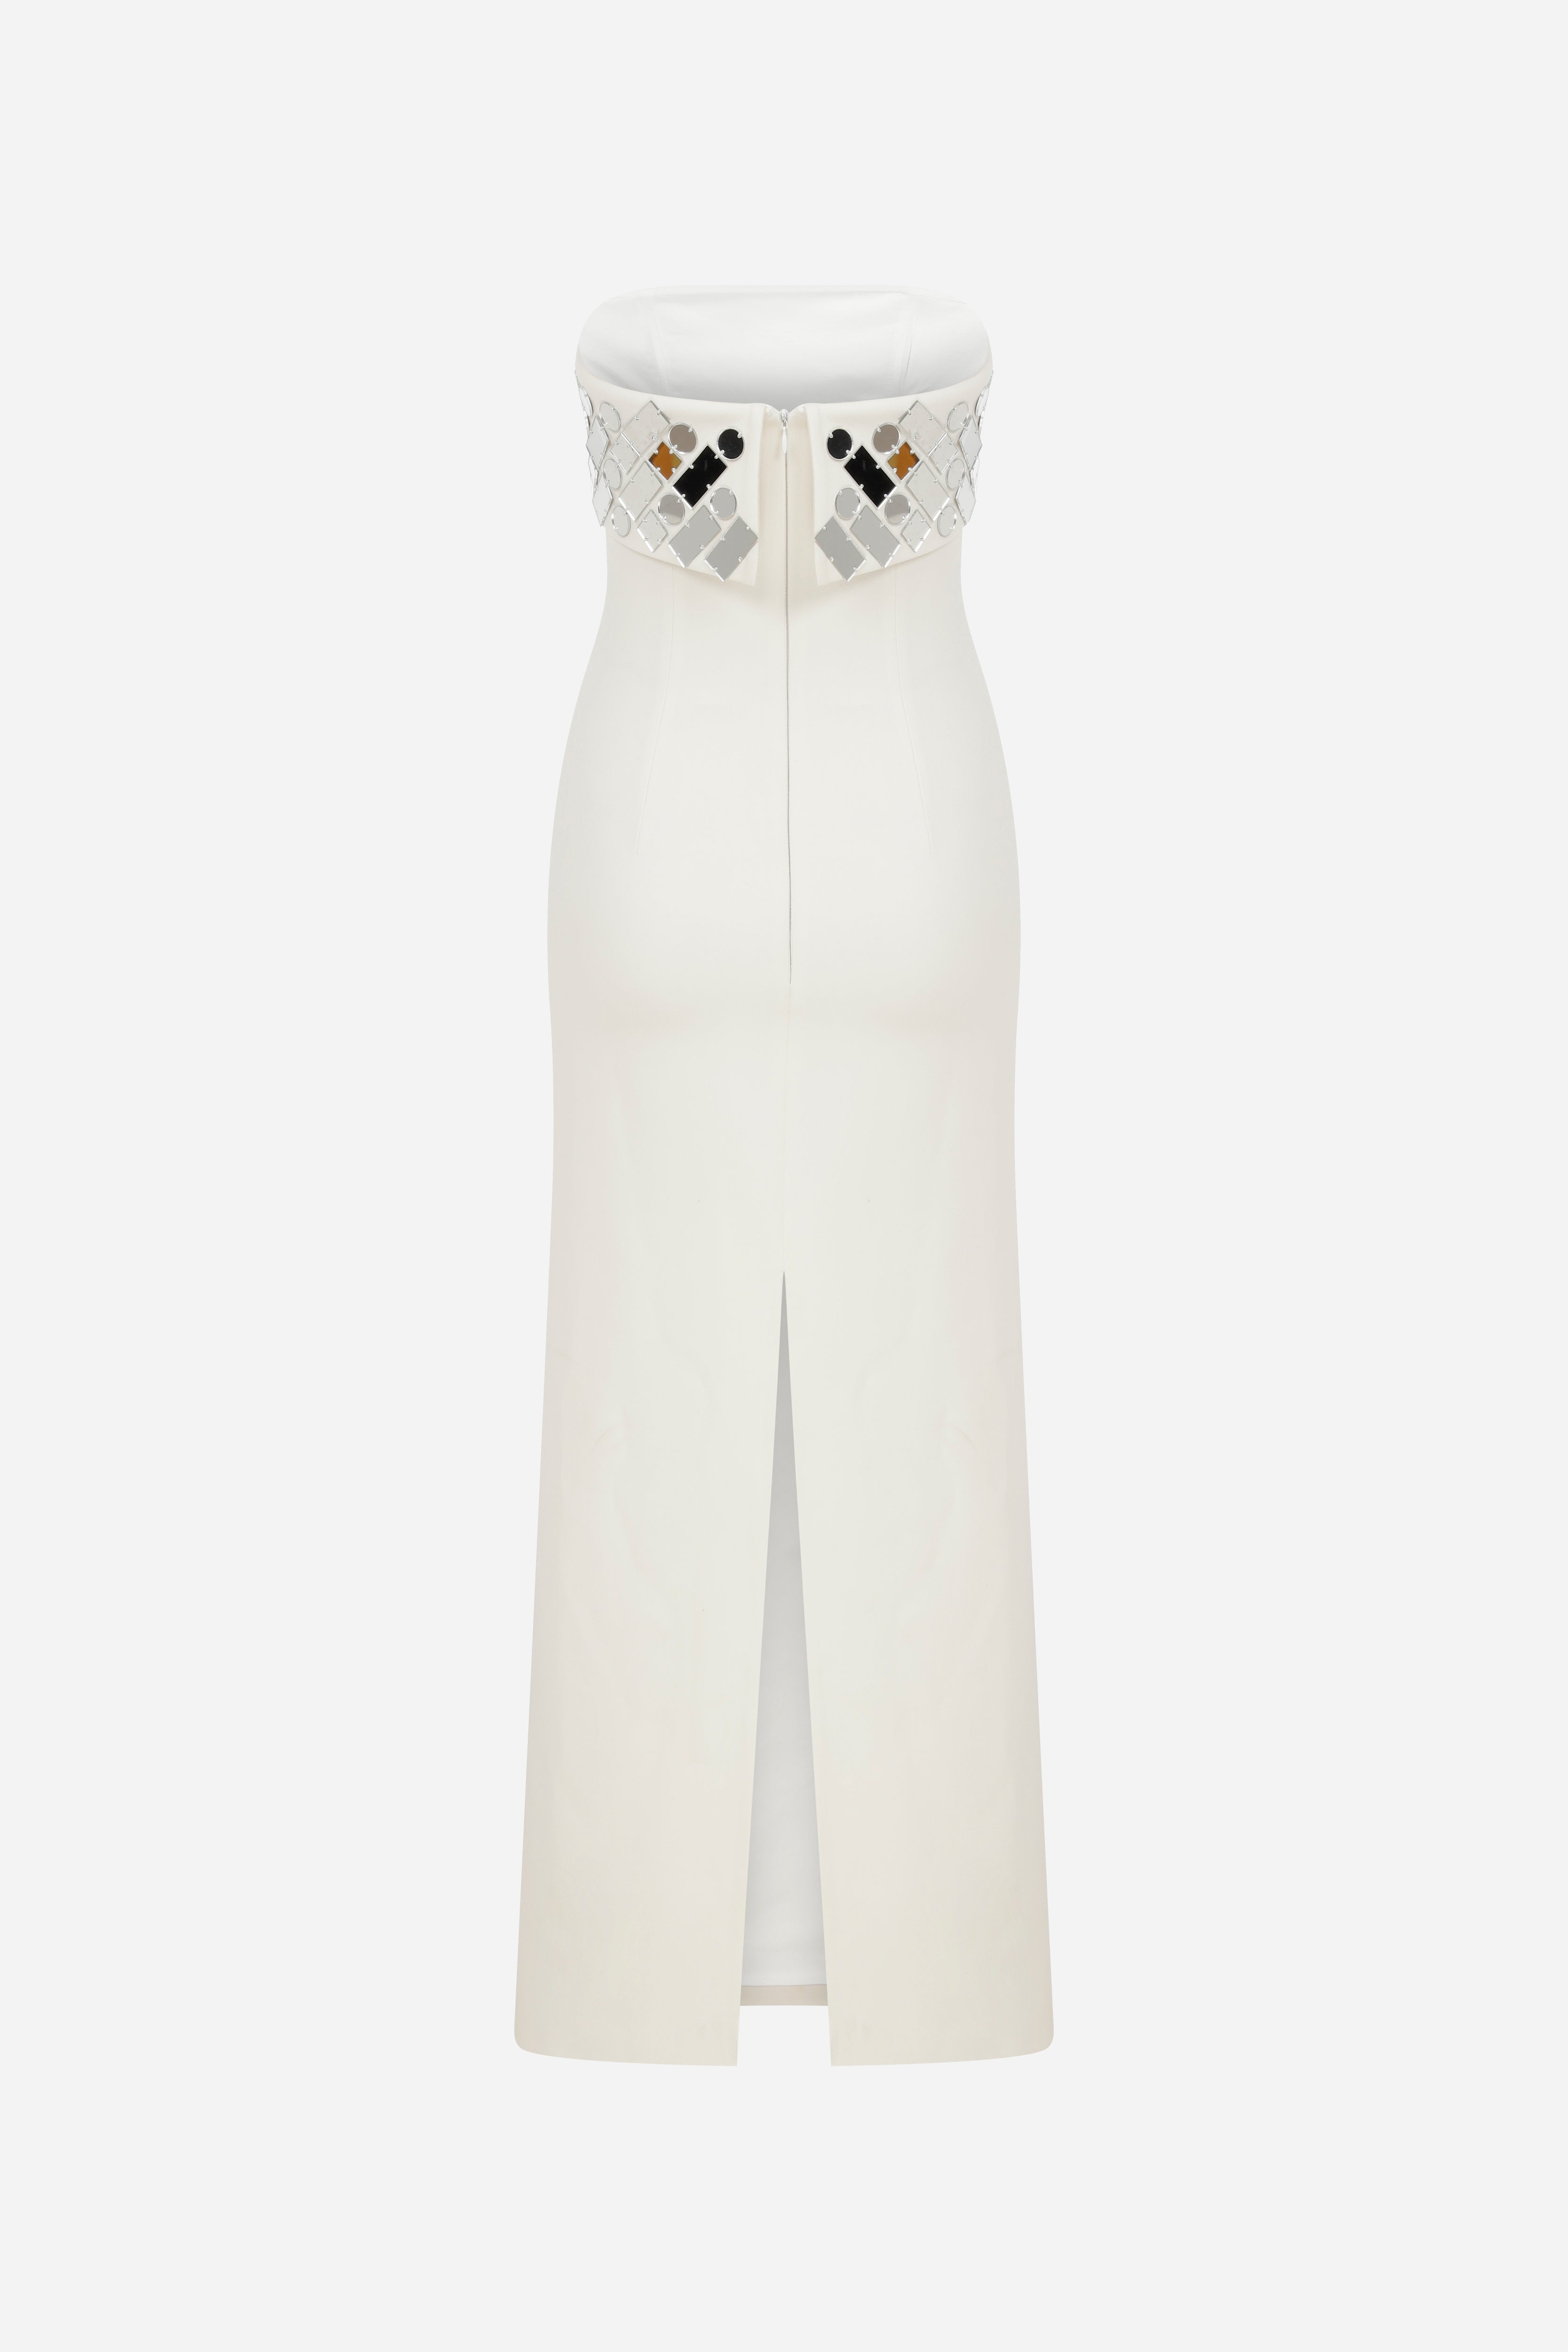 Grace - Strapless Midi Dress With Hand Stitched Mirrors